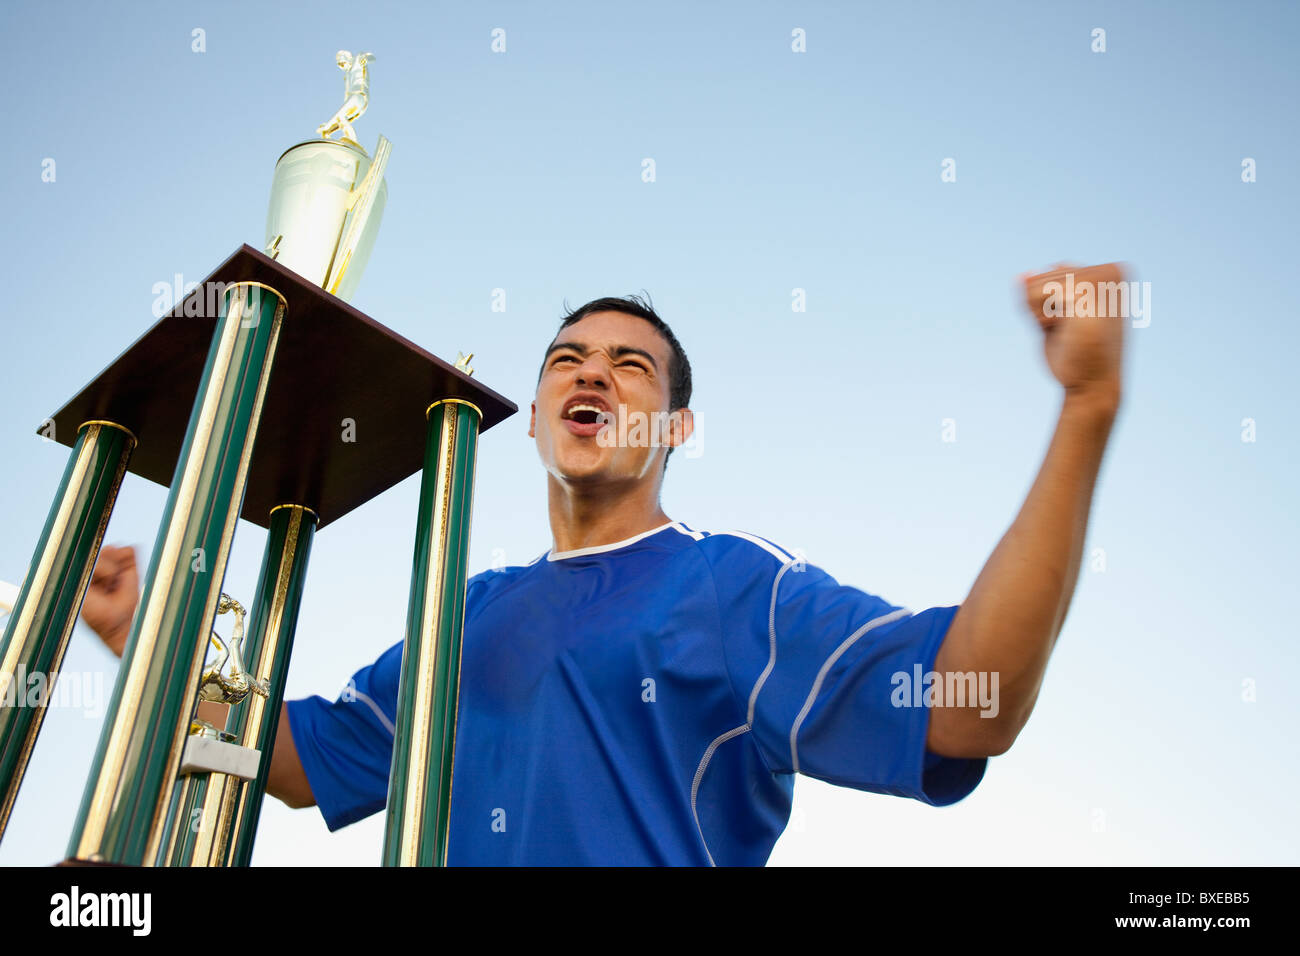 Trophy in front of cheering soccer player Stock Photo